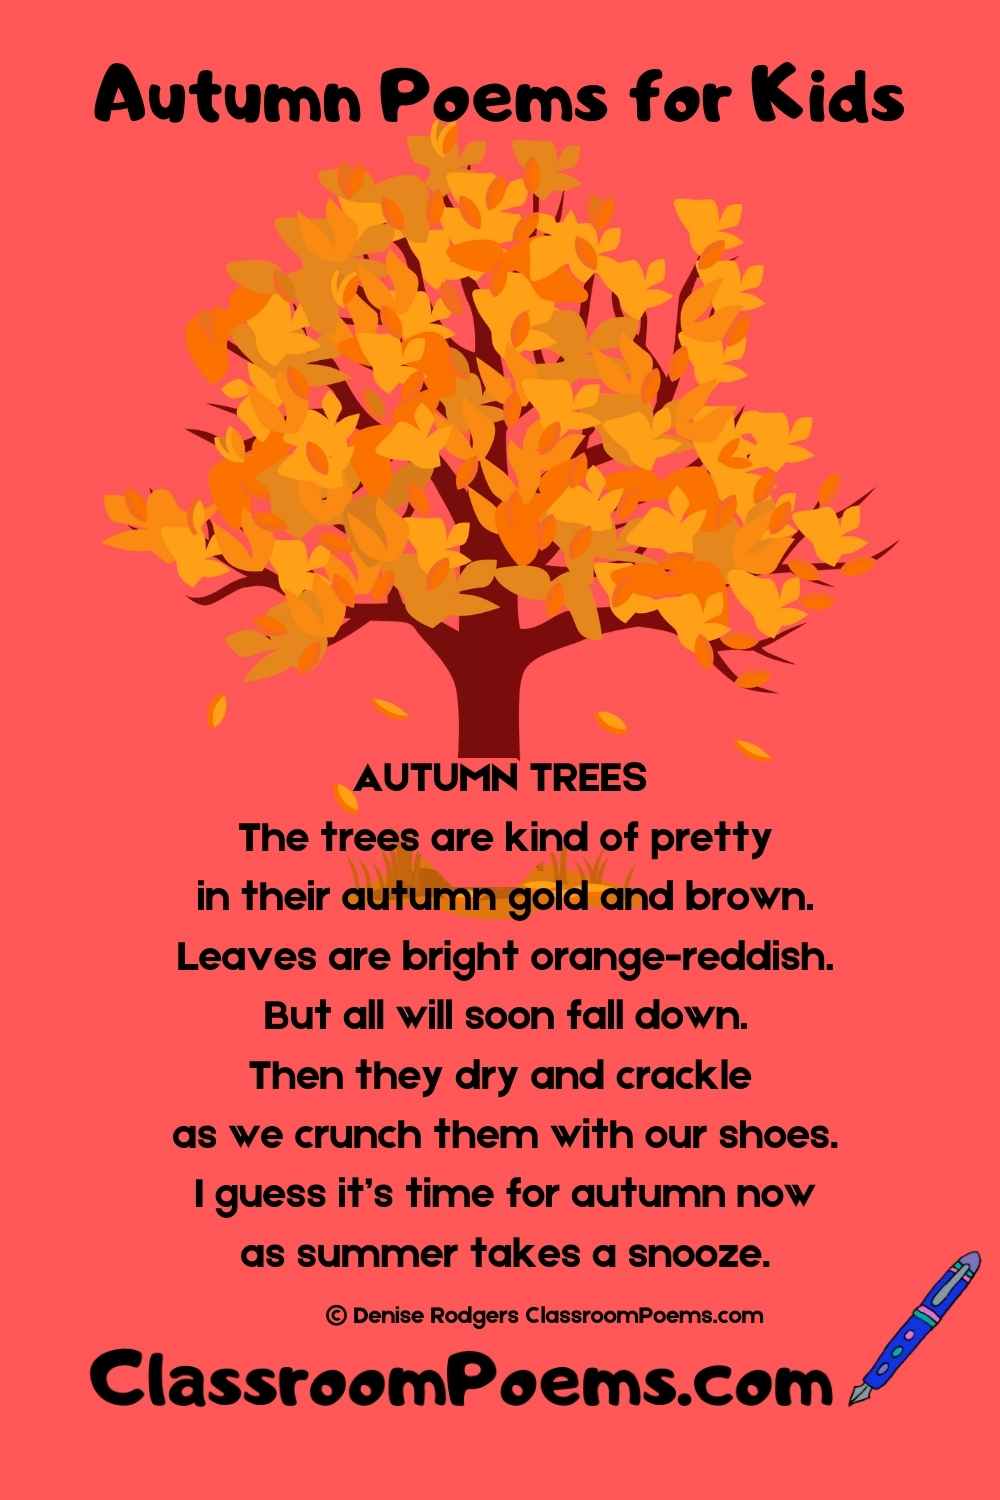 Autumn Poems for Kids